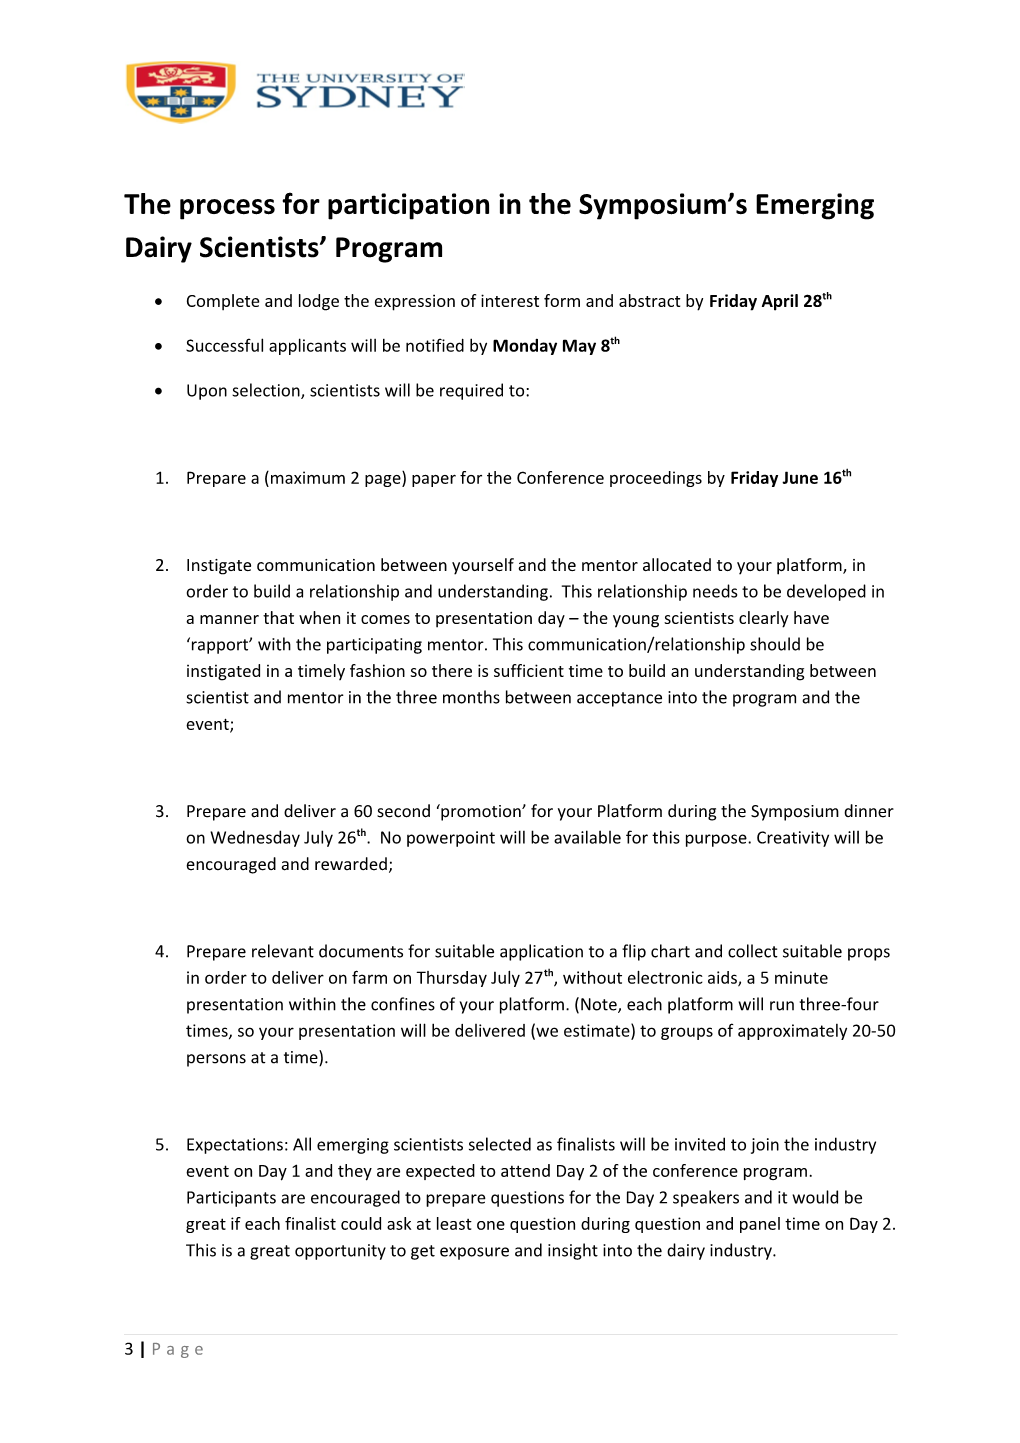 Call to Young Dairy Scientists Wishing To